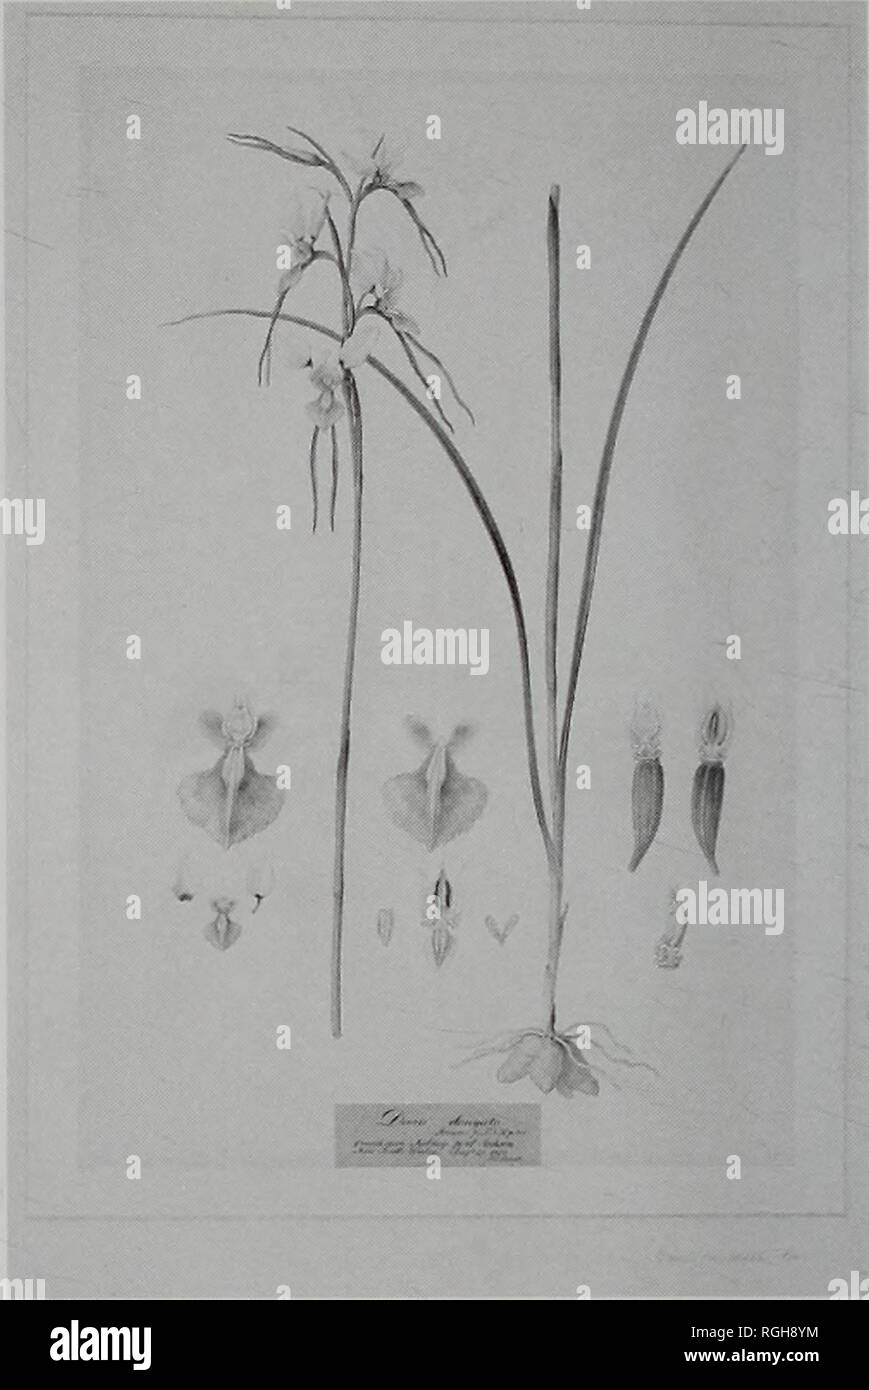 . Bulletin of the British Museum (Natural History), Botany. . 174 Diuris alba 175[A] Diuris punctata 175[A]. DIURIS PUNCTATA Sm., Exot. bot. 1: 13, t. 8 (1805), Orchidaceae. Britten (1909: 144) list. '175. D[iuris] punctata Sm.' Numeric list. [Diuris] 'punctata Sm. 175'. Alphabetic list. [Diuris] 'punctata Sm. 175'. Annotation on drawing, [label] 'Diuris elongata. Browns p.F.N.H. p.316. found near Sydney, port Jackson. New South Wales. Augst. 27. 1803. Ferd. Bauer.' Drawing. 498 x 327 mm. Lower stem and tuber (centre right), upper stem with inflorescence (centre left), floral parts including e Stock Photo